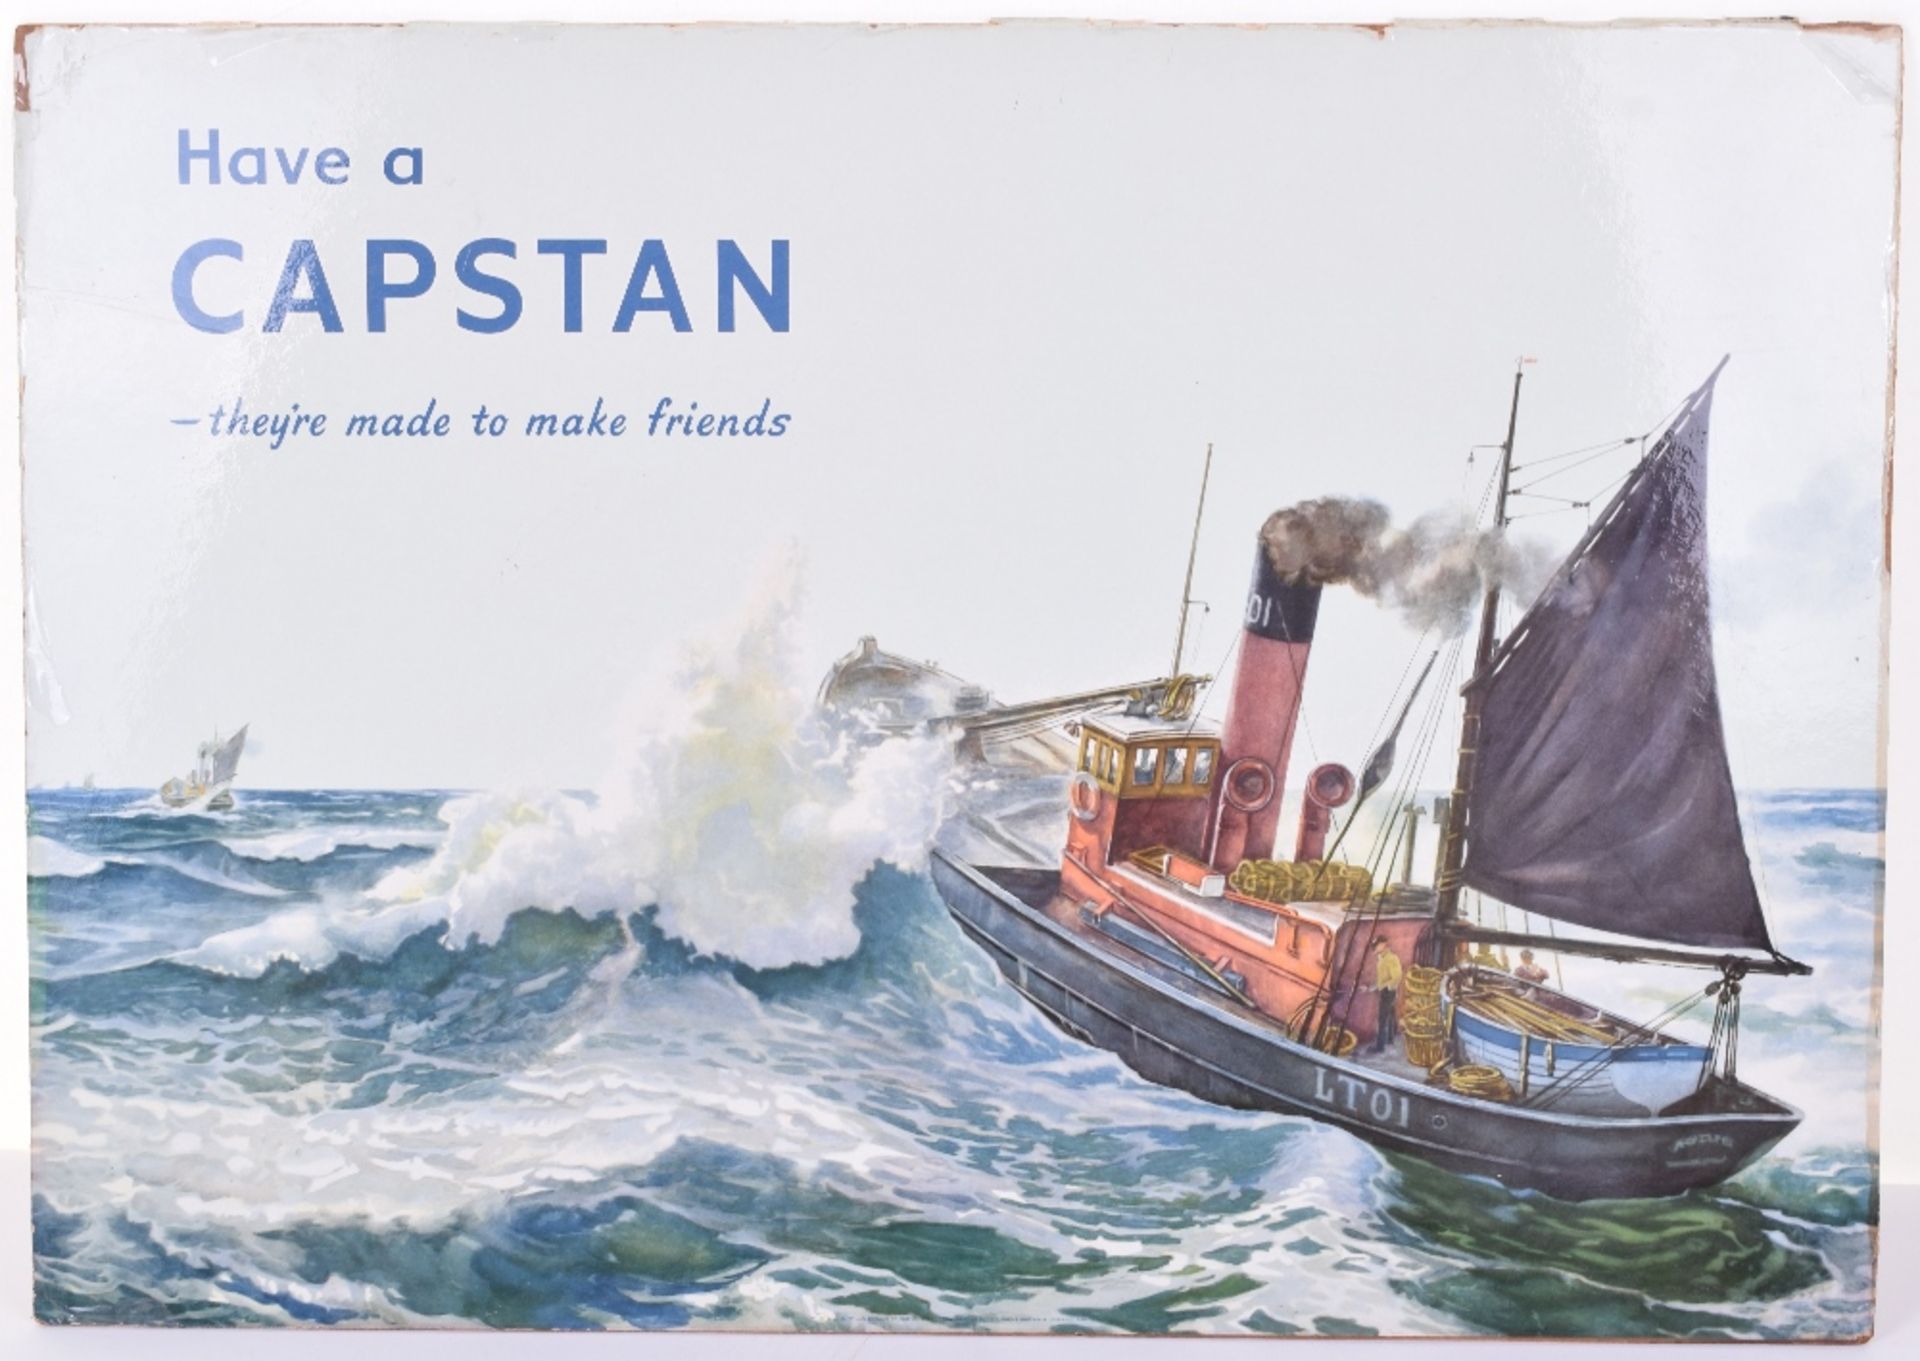 Have a Capstan Advertising poster